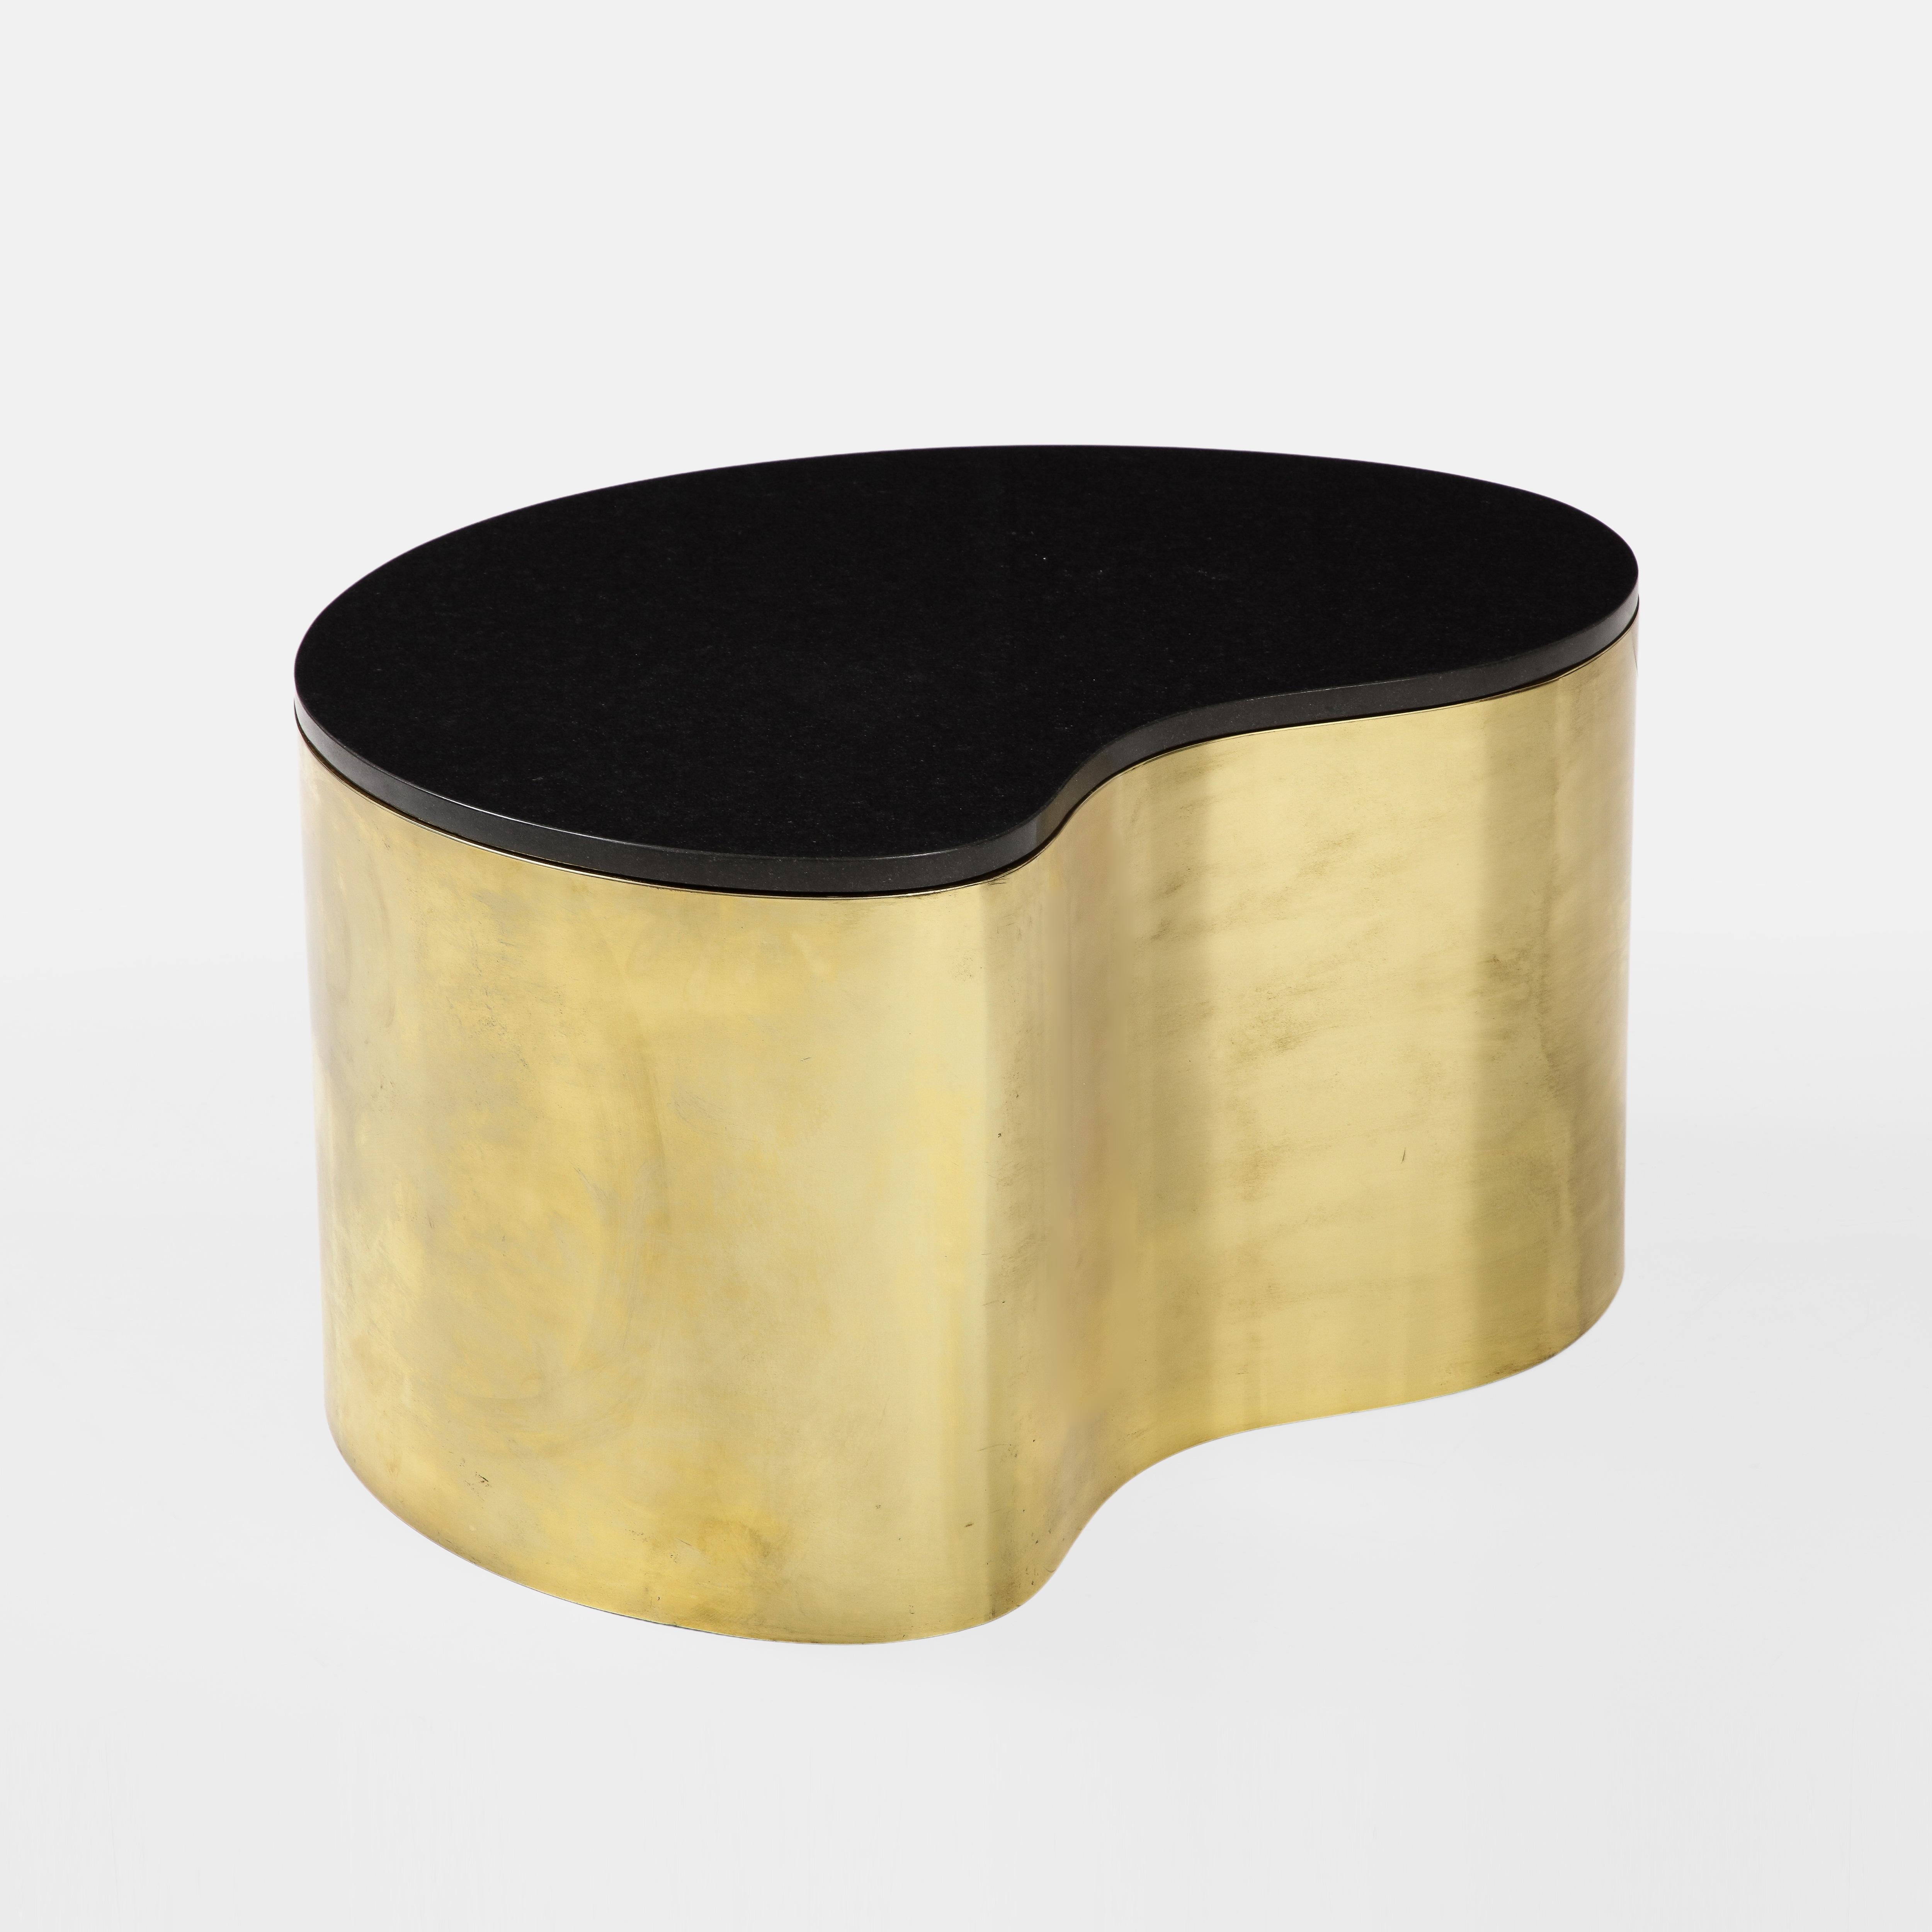 Karl Springer Freeform Coffee Table in Brass and Granite, 1970s For Sale 2